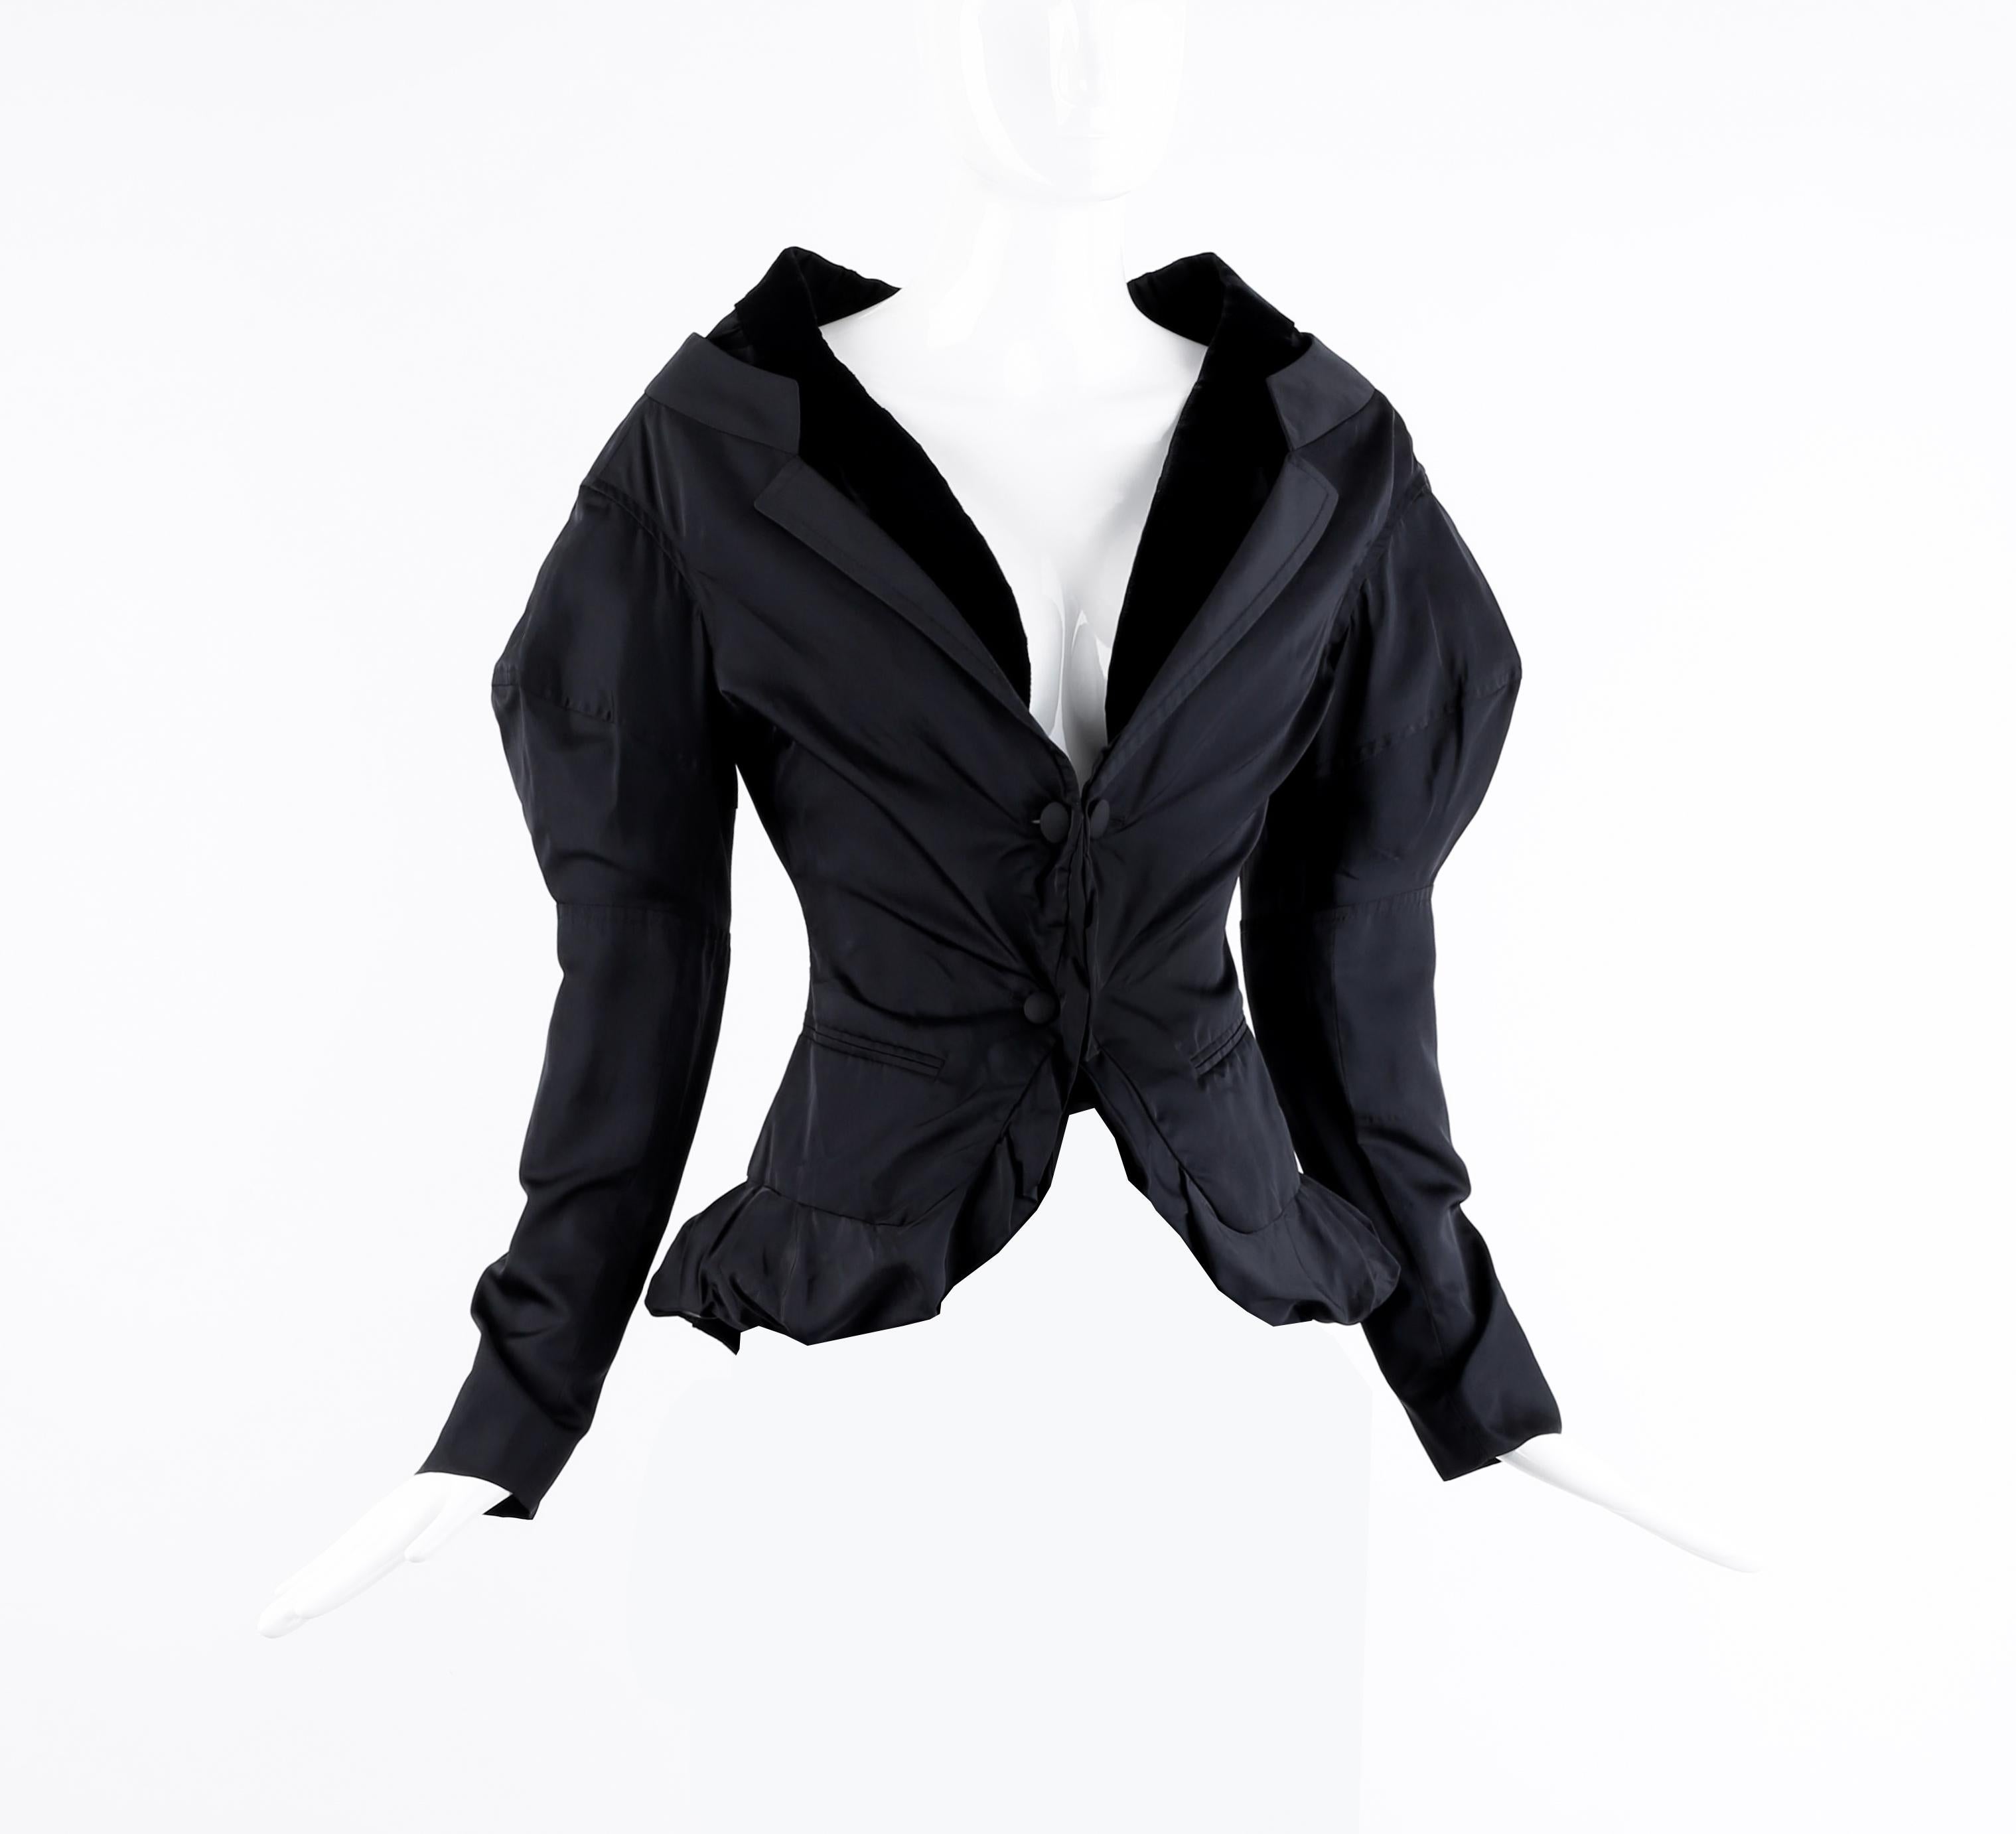  Tom Ford for Yves Saint Laurent FW 2002 Iconic Runway Silk Black Blouse Jacket  For Sale 1